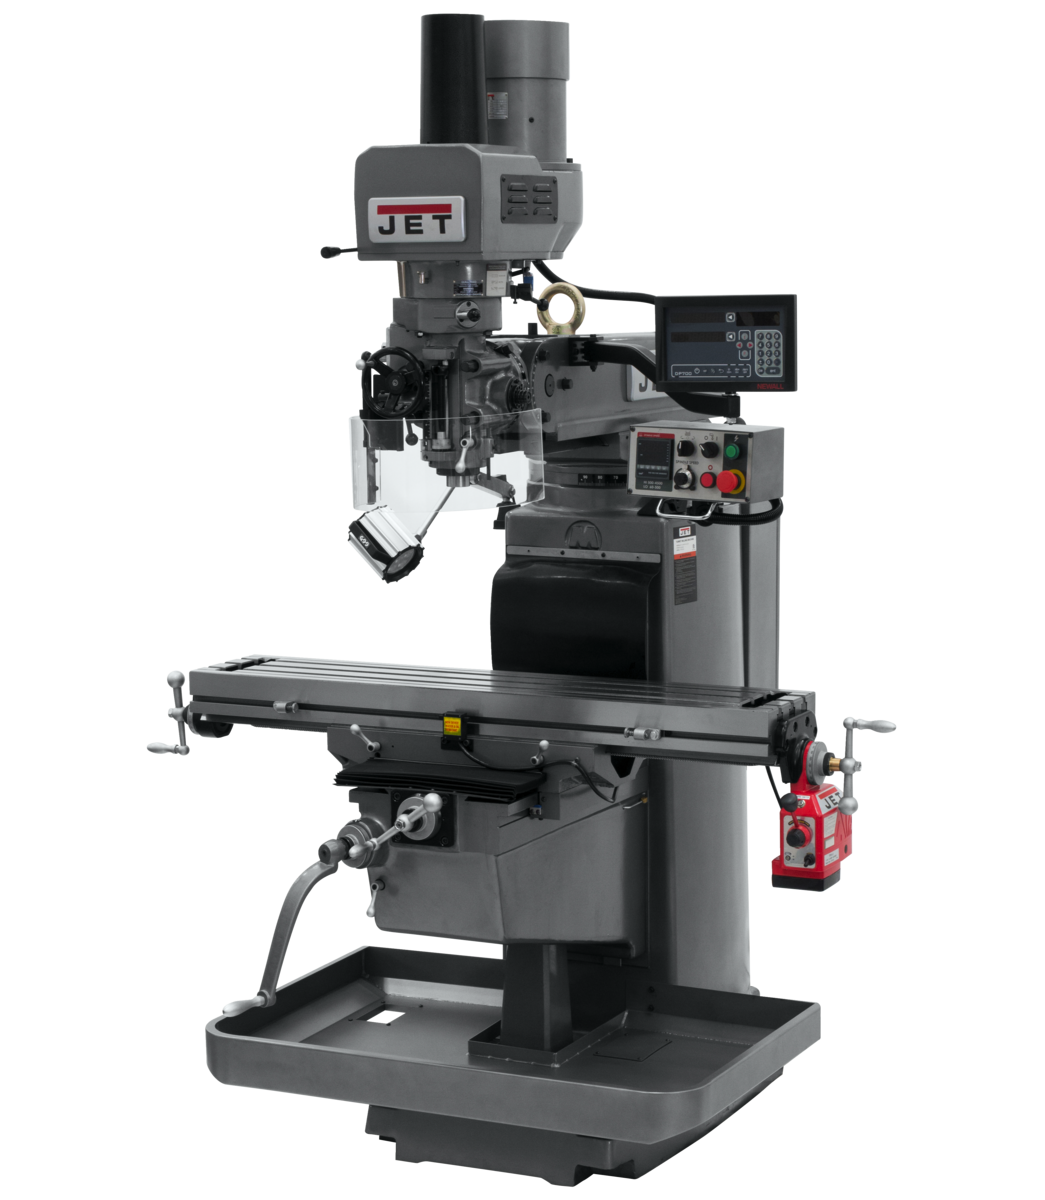 JTM-1050EVS2/230 Mill With 3-Axis Newall DP700 DRO (Knee) With X-Axis Powerfeed and Air Powered Draw